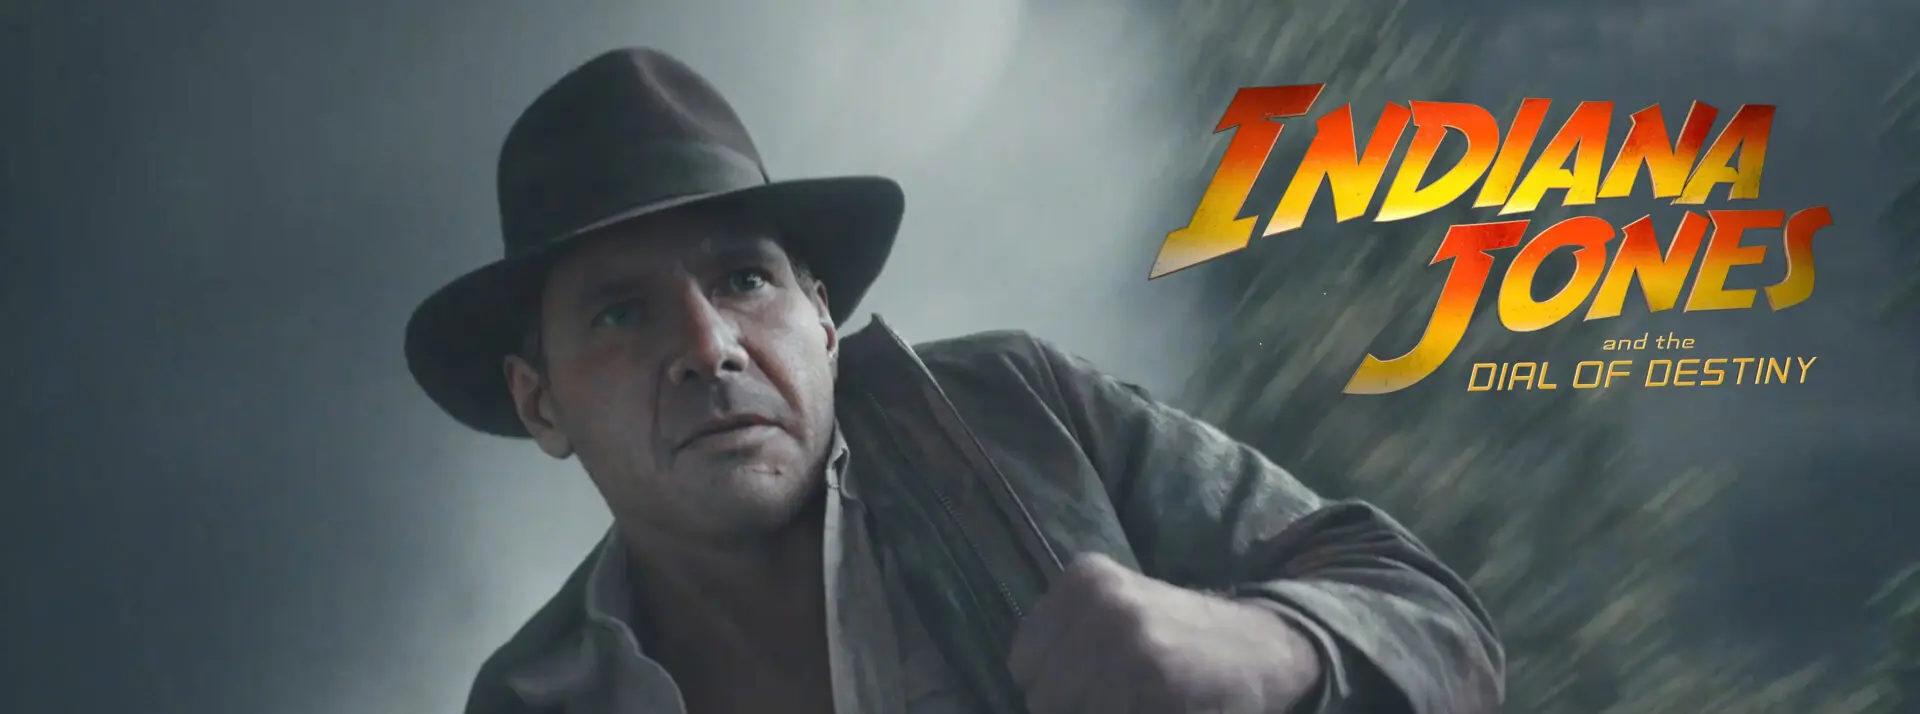 Indiana Jones and the Dial of Destiny theatrical trailer1